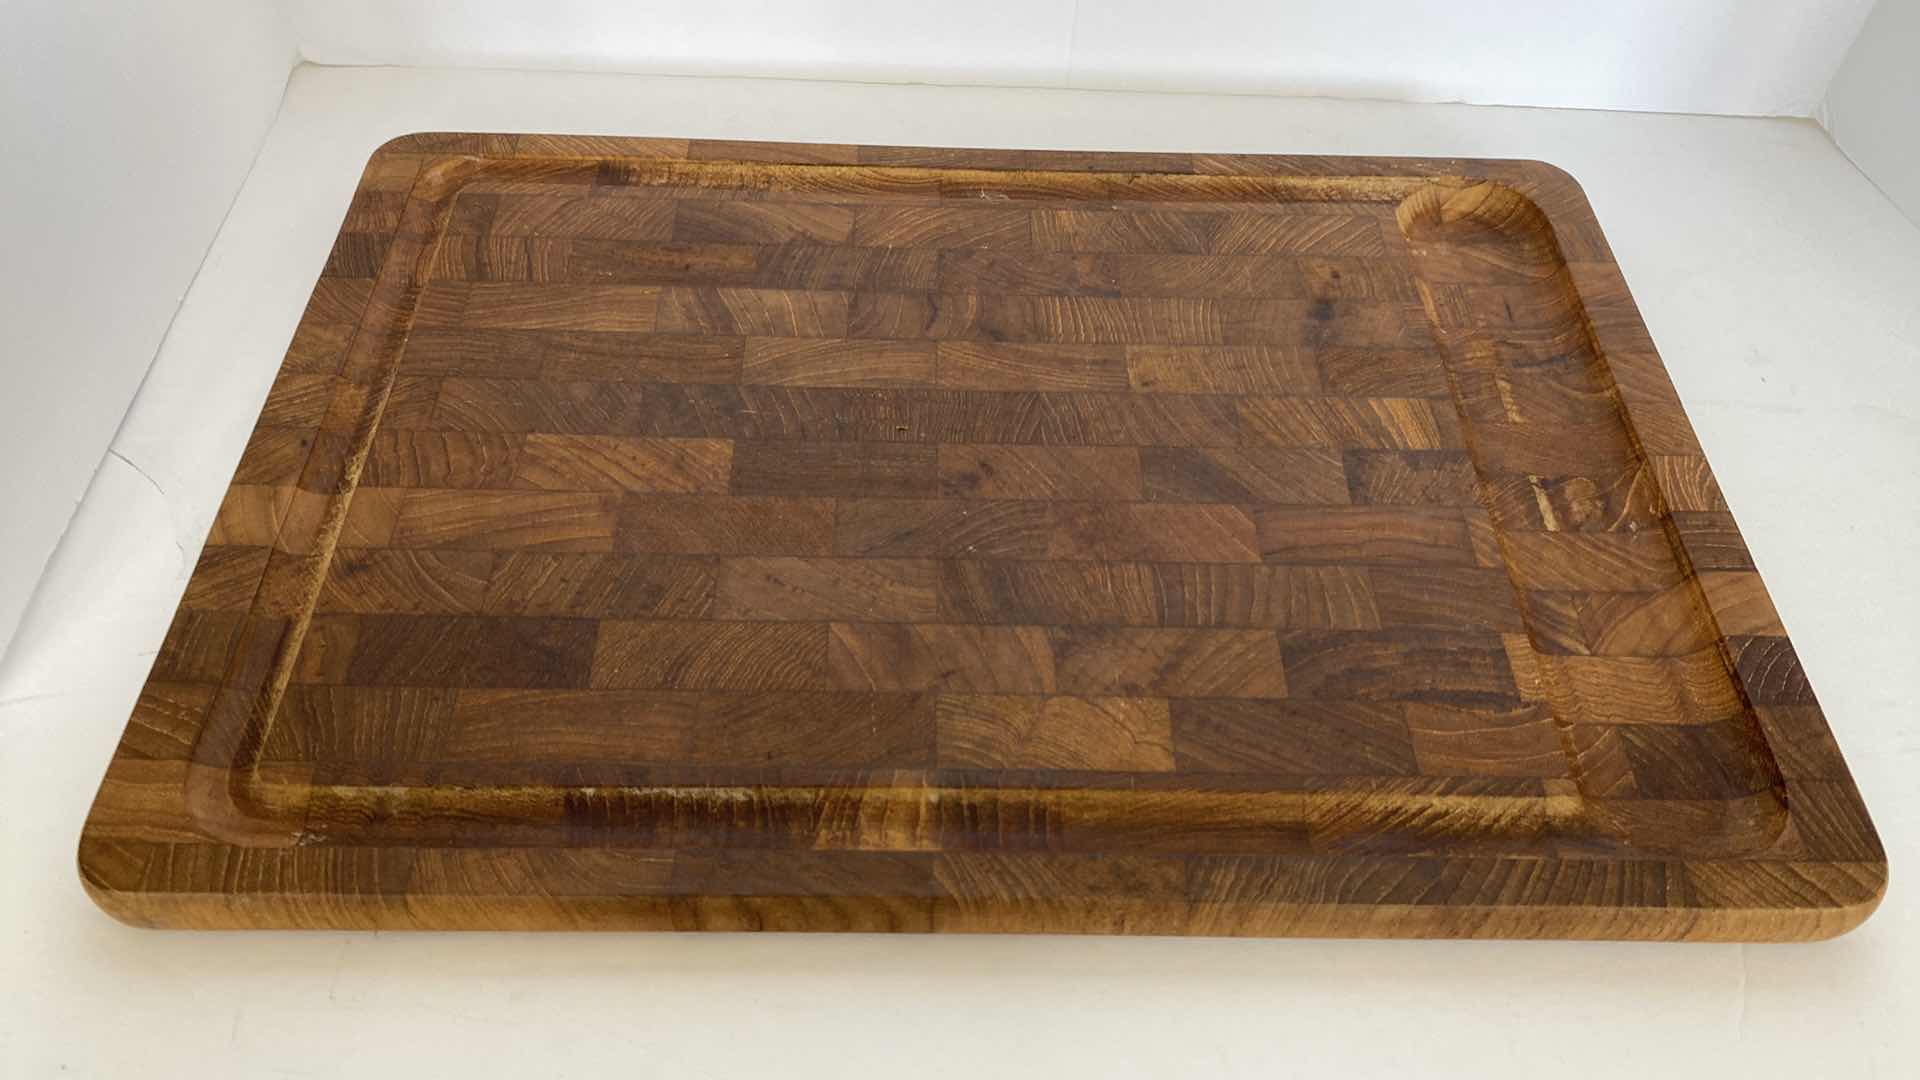 Photo 2 of PAIR OF DECORATIVE WOOD CUTTING BOARDS LARGEST 17” x 11 1/2”